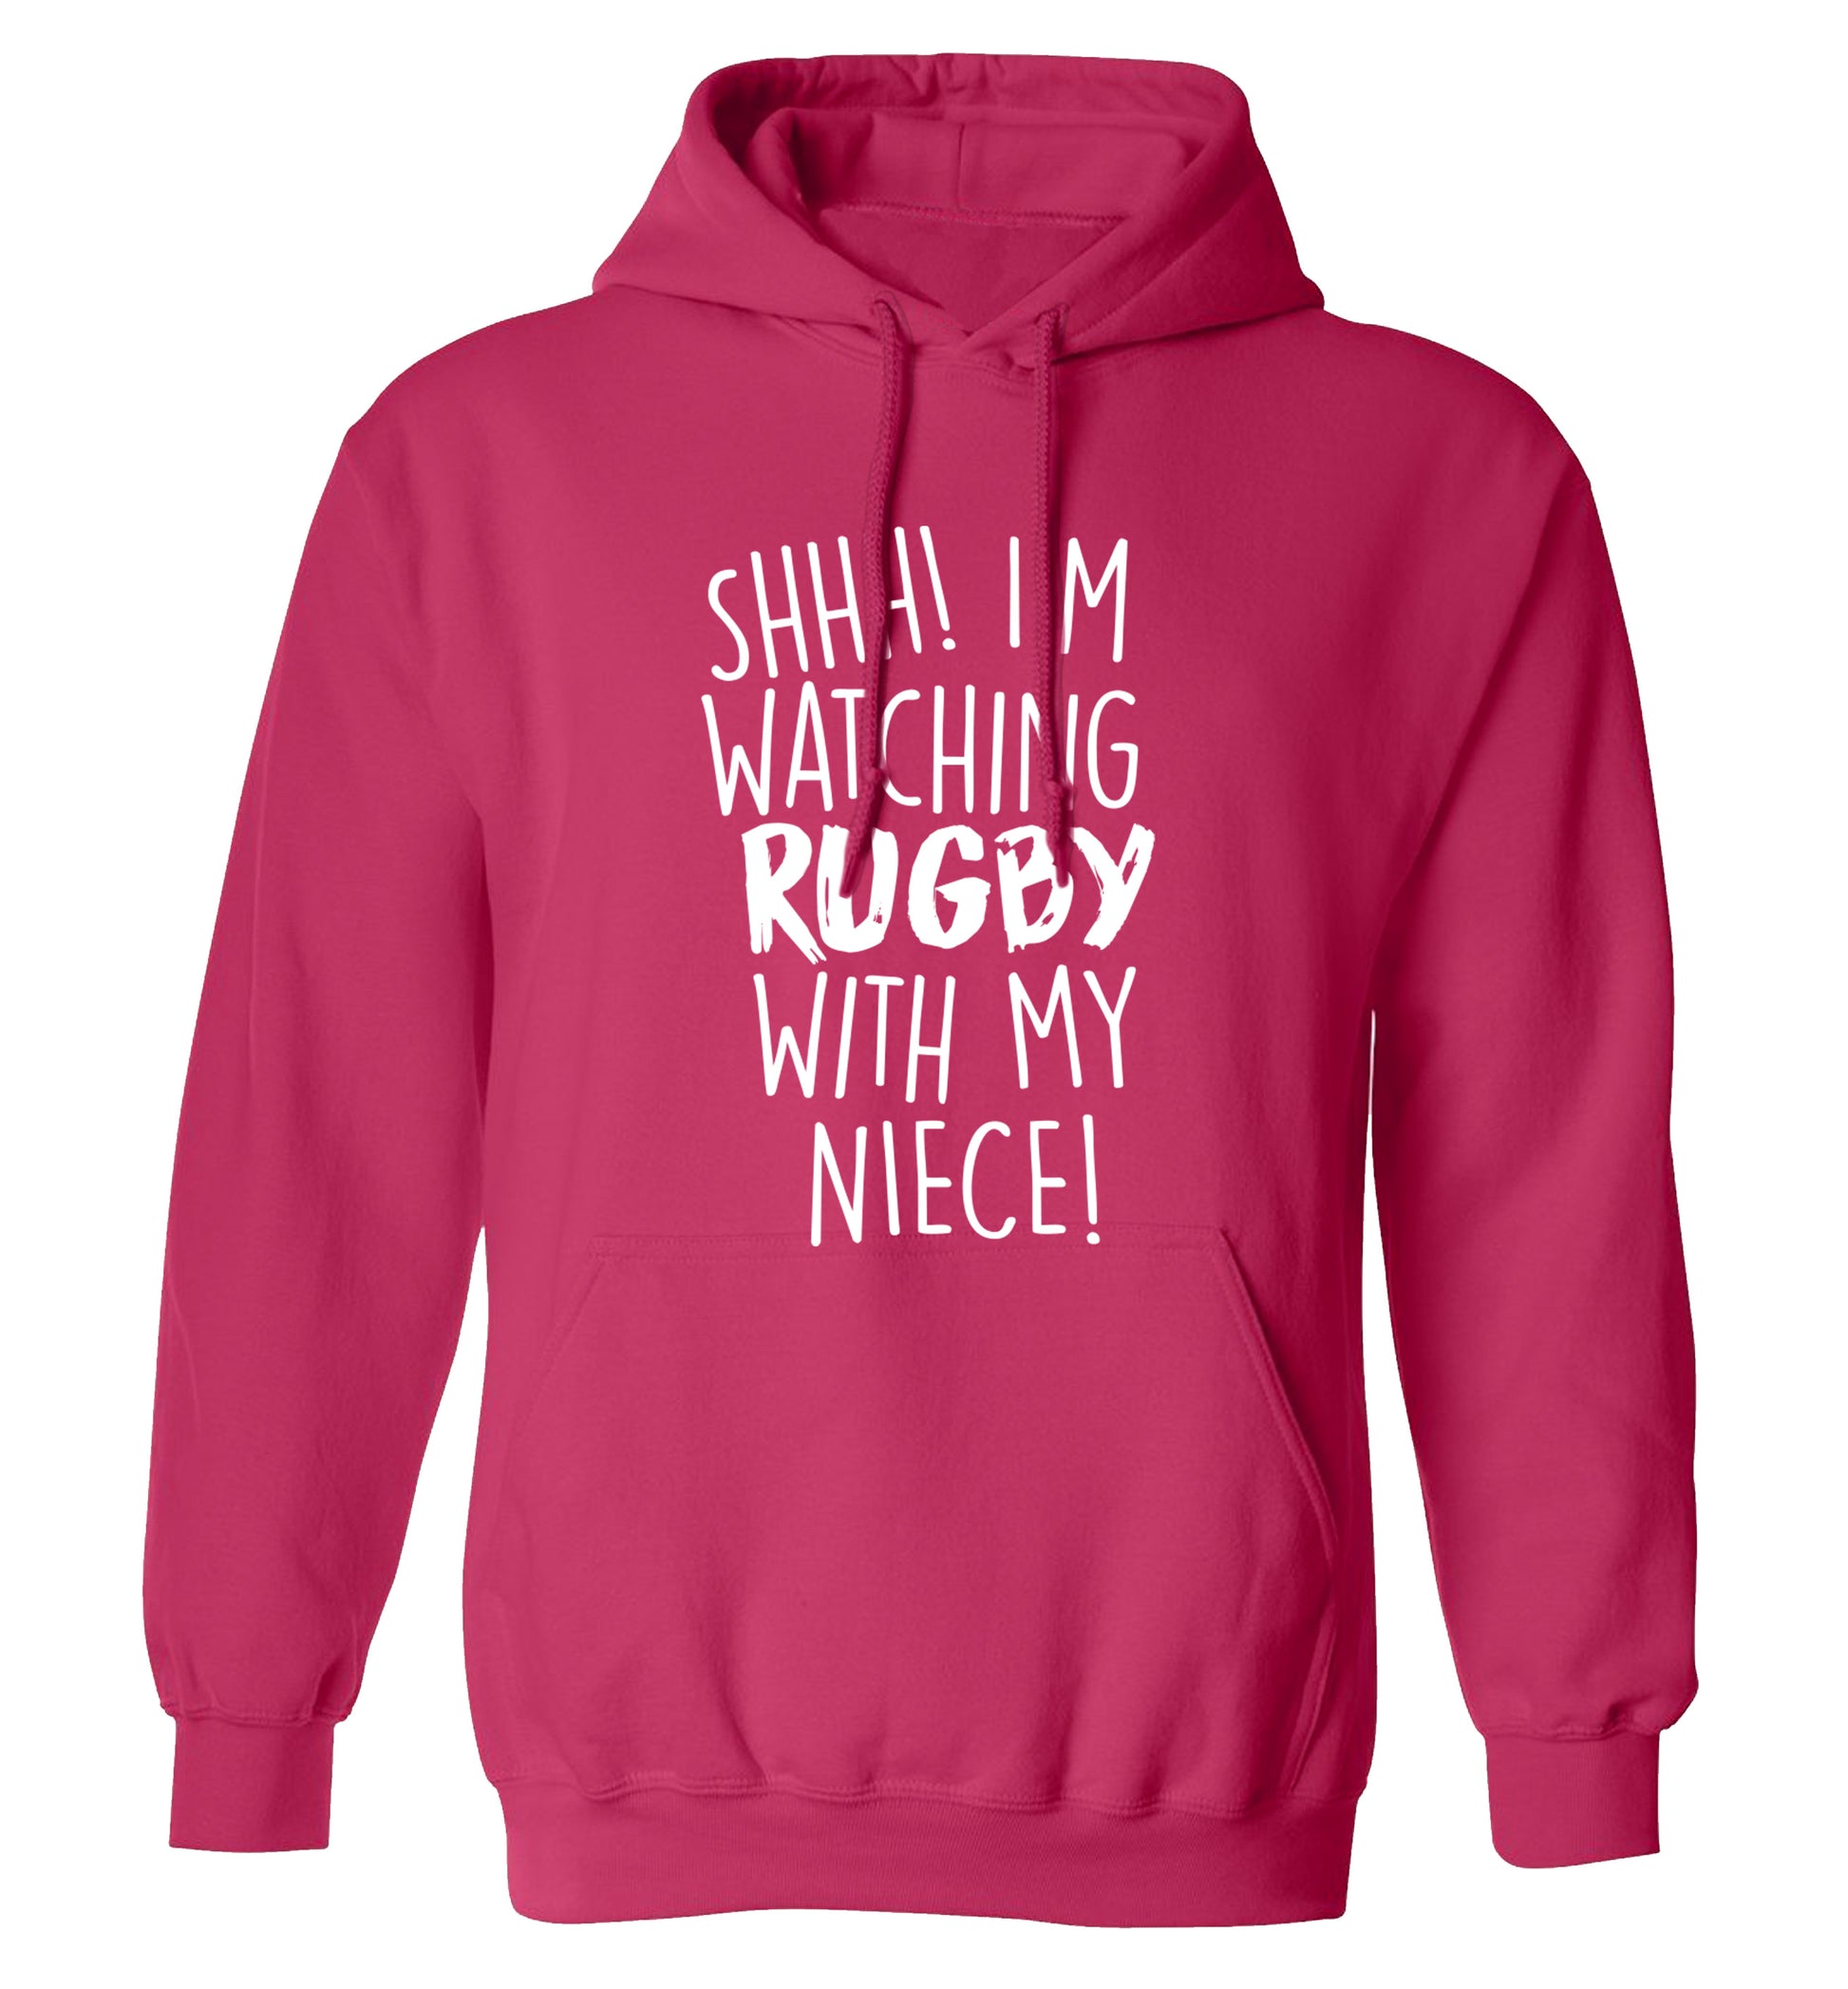 Shh.. I'm watching rugby with my niece adults unisex pink hoodie 2XL